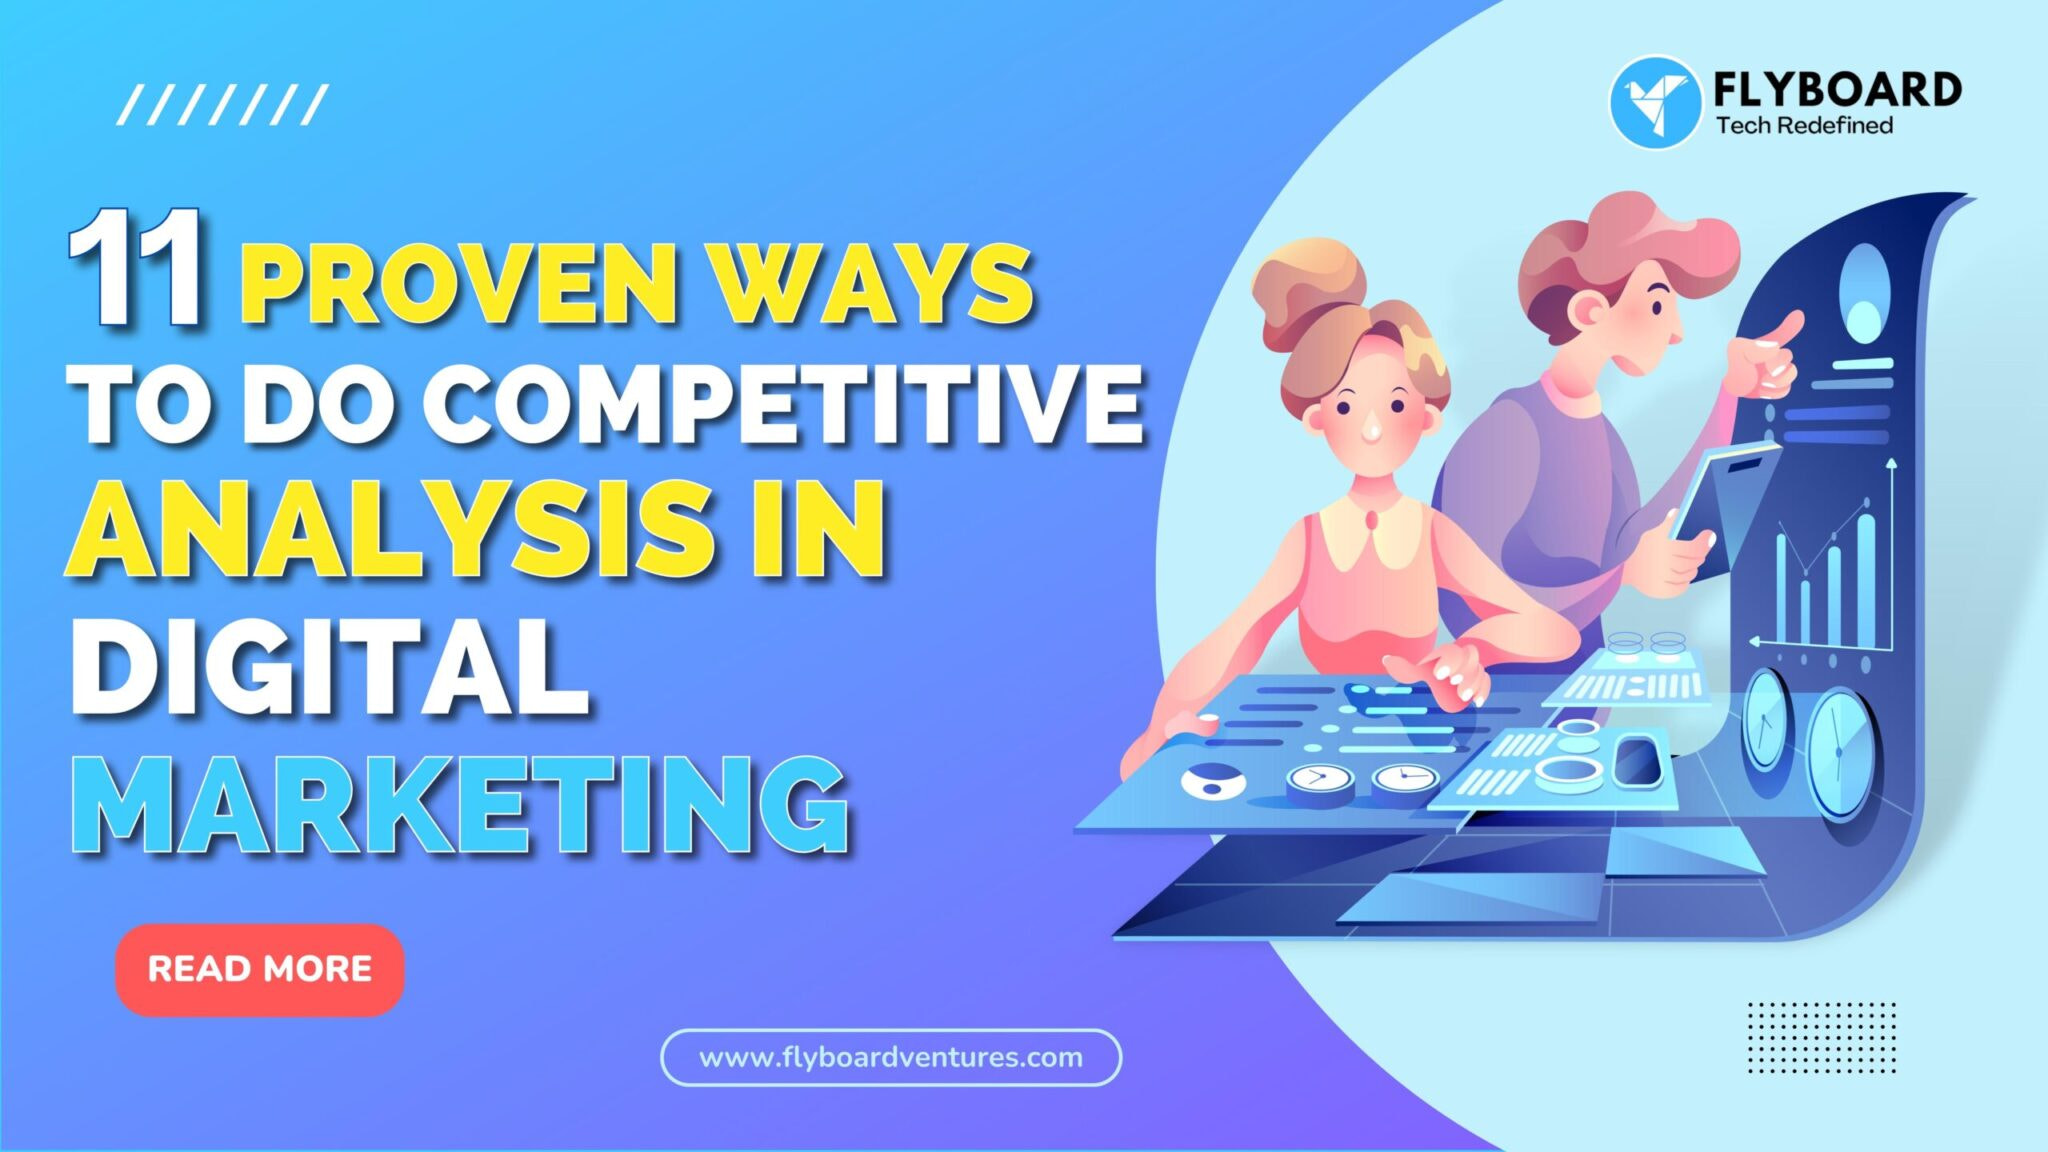 How To Do A Competitive Analysis For Digital Marketing | Flyboard Ventures